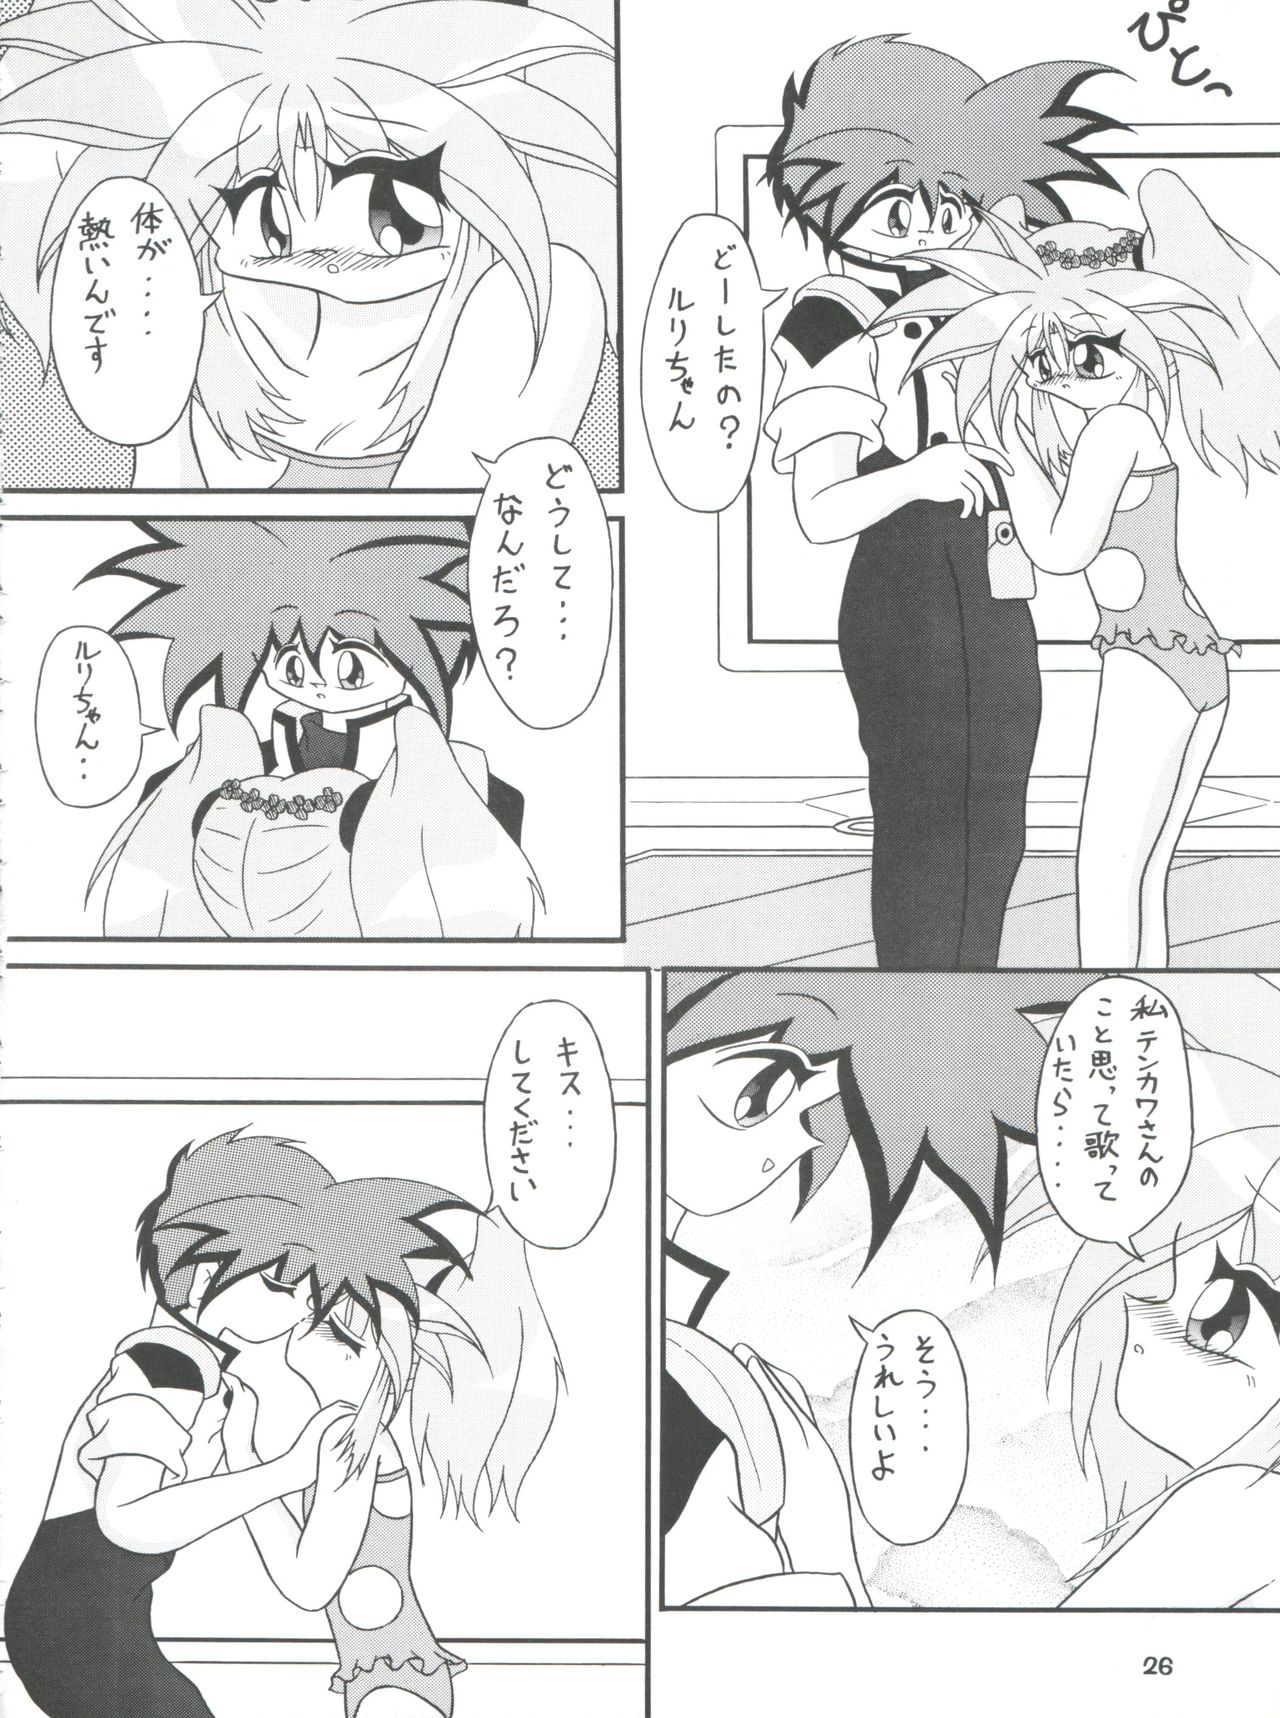 [DREAM HOUSE (Various)] PROMINENT 11 (Nadesico) page 26 full